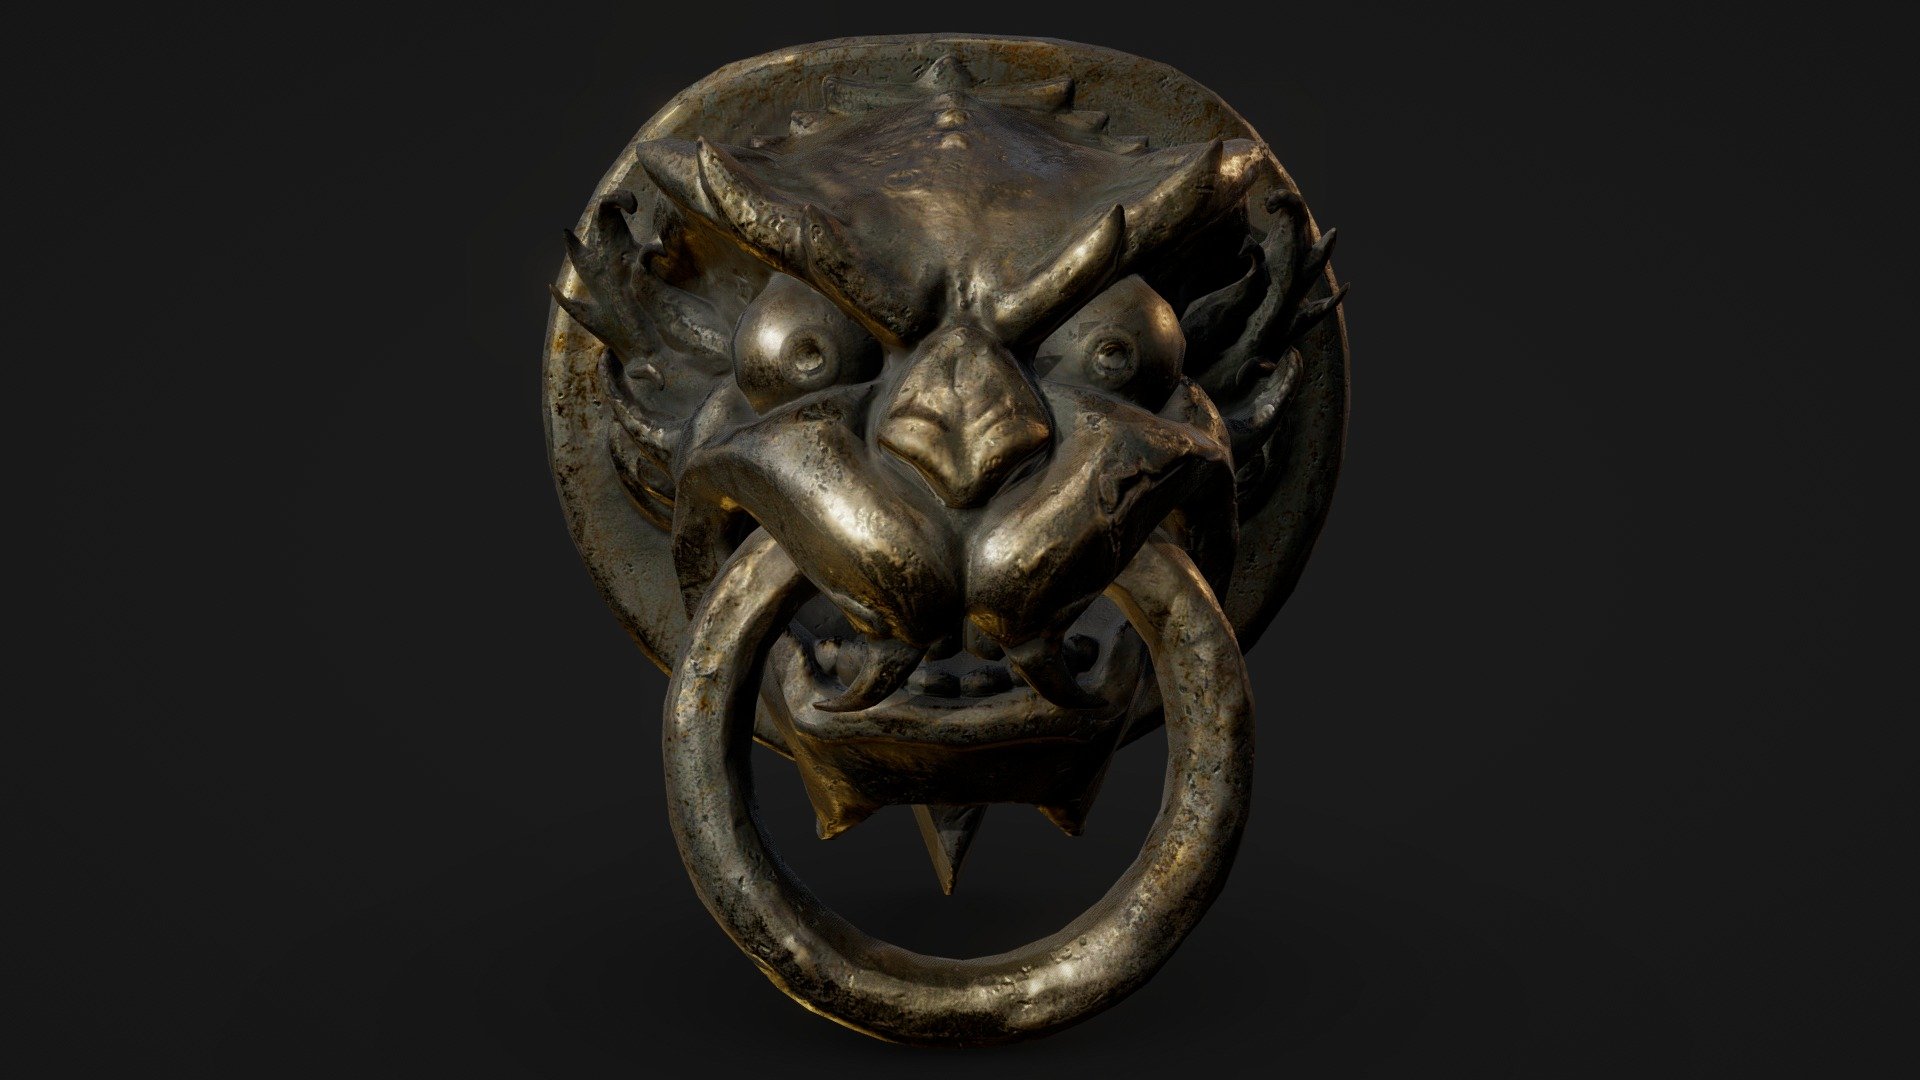 Antique, iron door handle in the form of a Chinese dragon.

Technical specifications:

Optimized model

non-overlapping UV map

ready for animation

PBR textures 2K resolution: Normal, Roughness, Albedo, Metal  maps

Download package includes FBX and OBJ, which are applicable for 3ds Max, Maya, Unreal Engine, Unity, Blender.

Enjoy! - Antique Chinese Dragon Doorknob - Buy Royalty Free 3D model by U3DA (@unreal.artists) 3d model